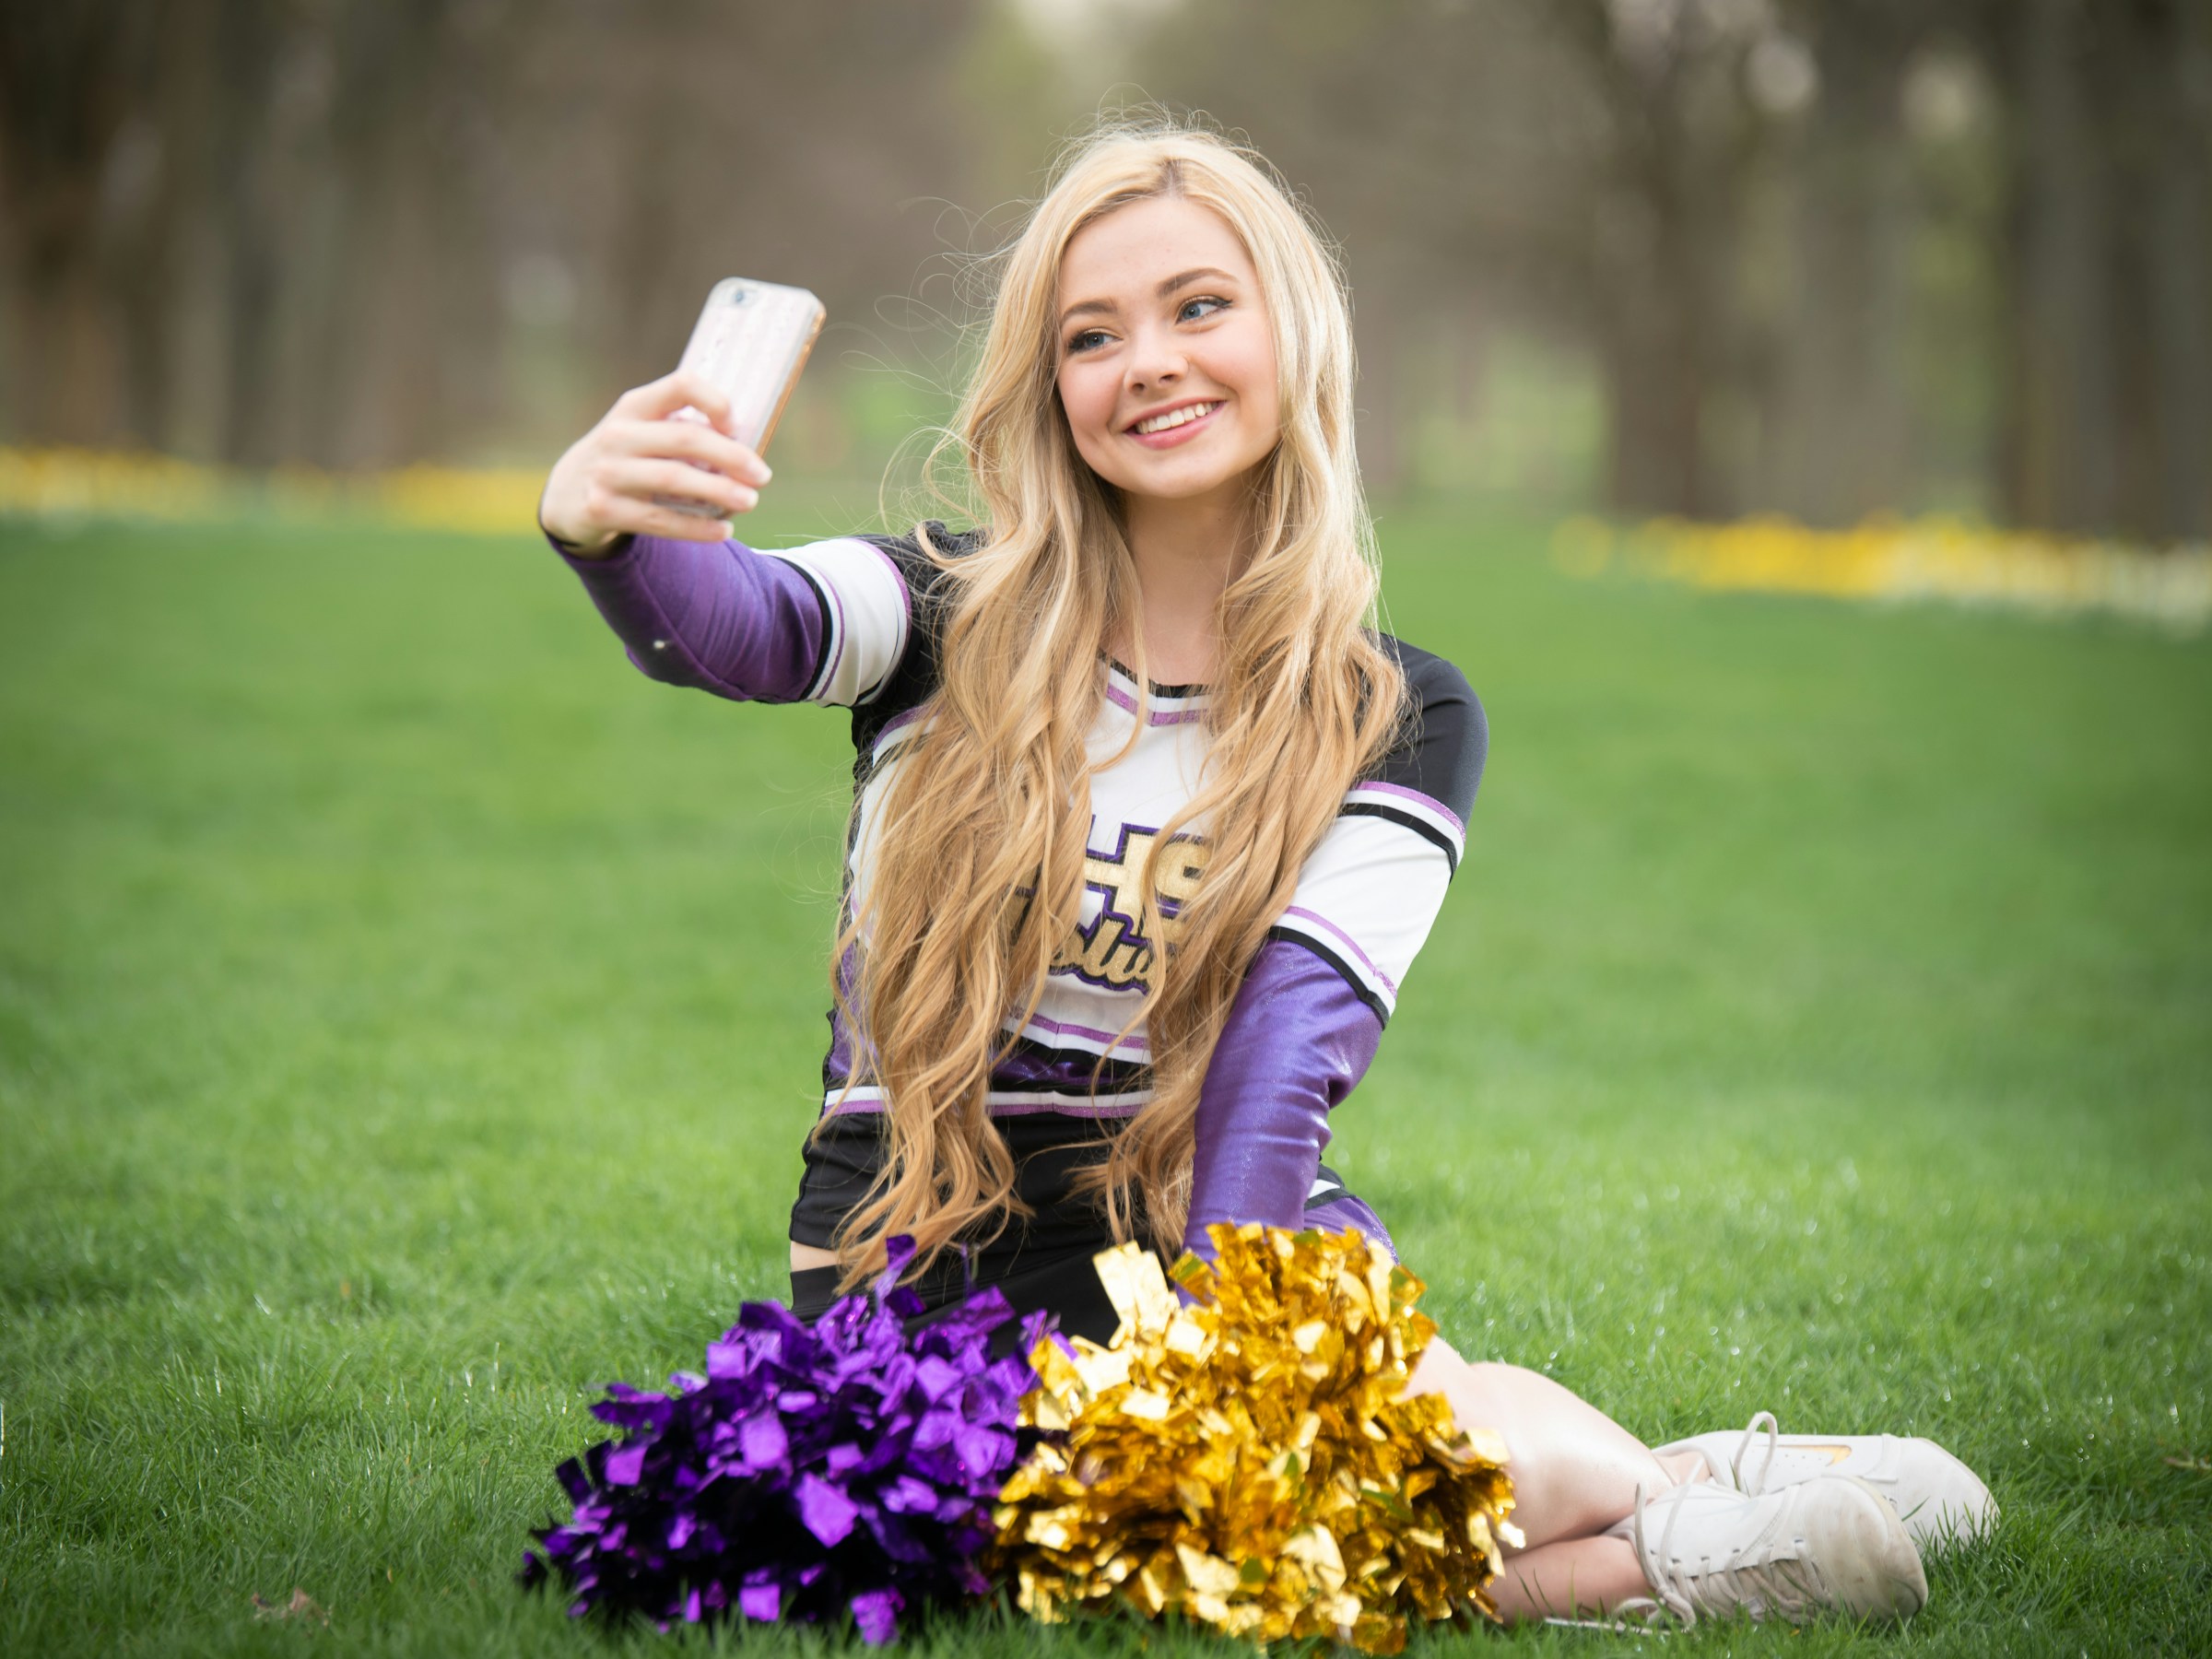 A young cheerleader taking a selfie | Source: Unsplash